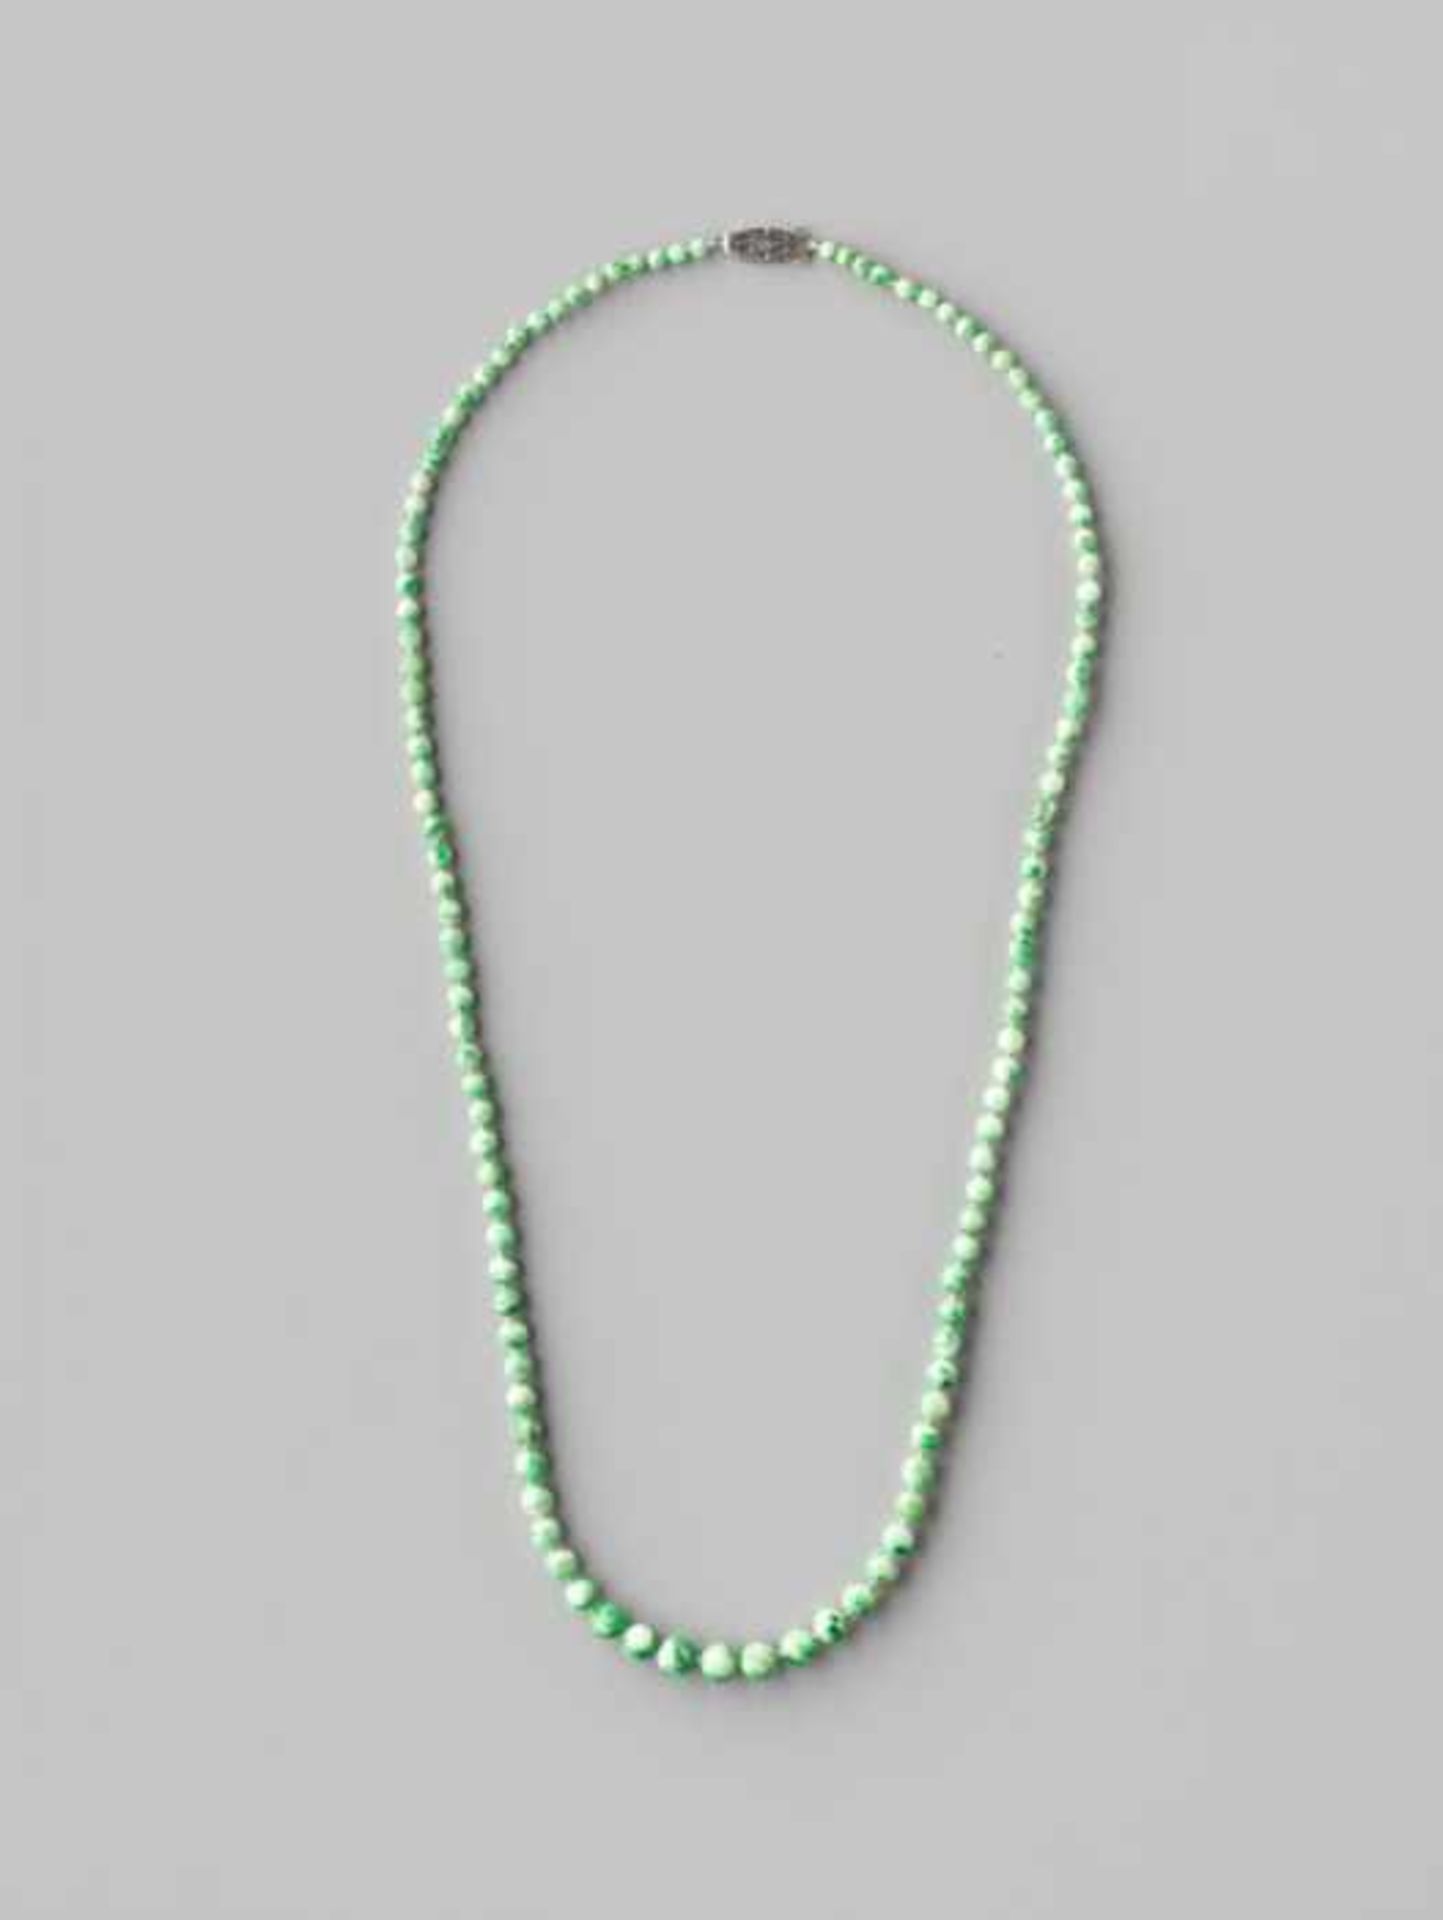 A JADEITE NECKLACE WITH SHADES OF INTENSE EMERALD GREEN, 116 BEADS, QING DYNASTY Natural light green - Image 3 of 5